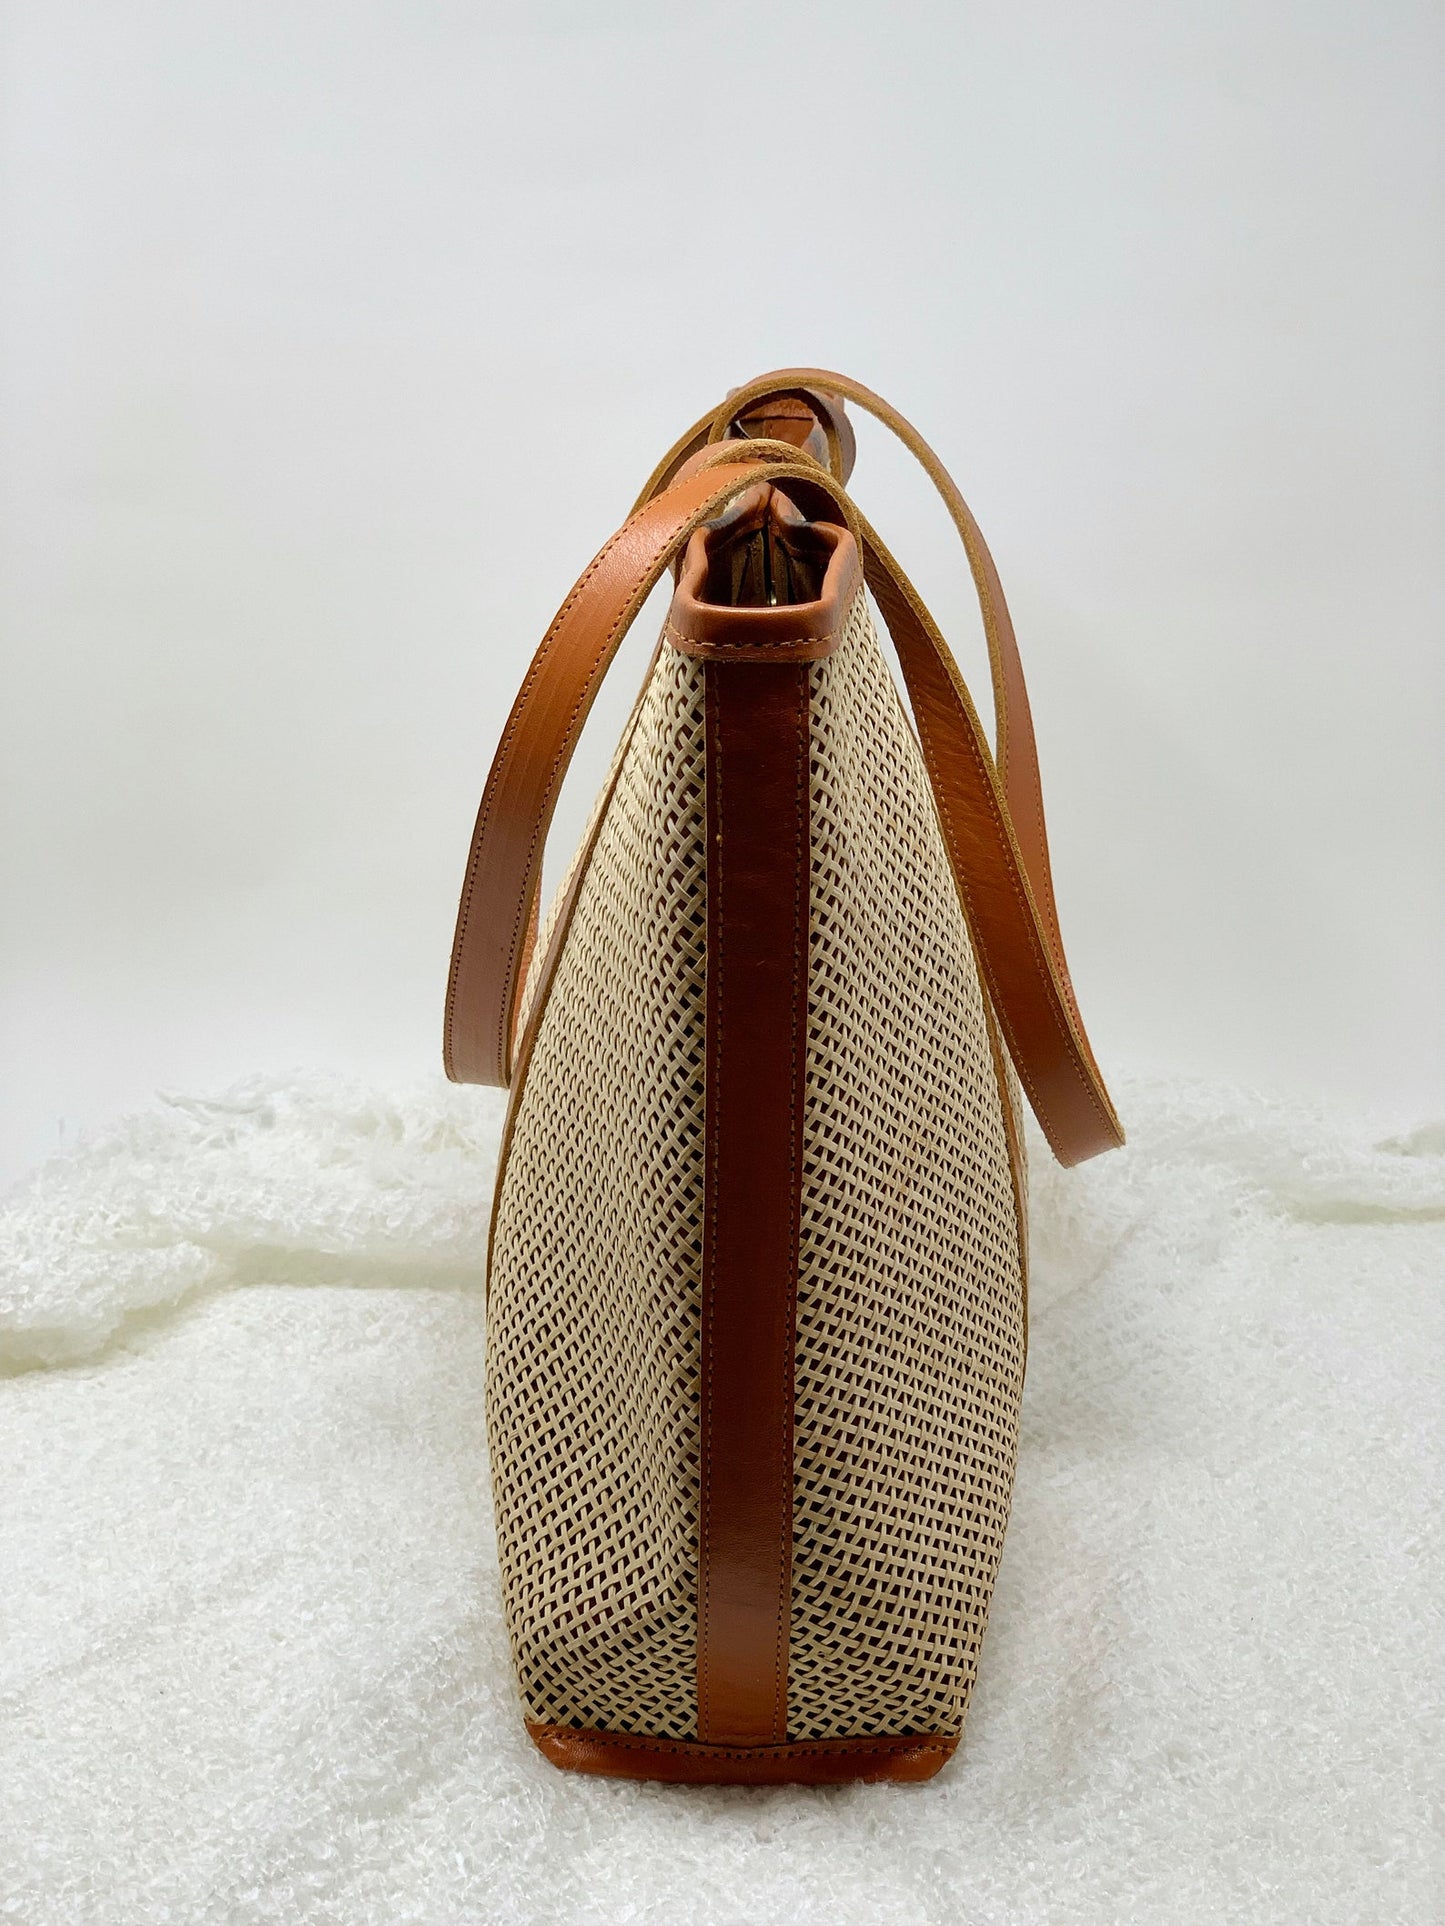 Rattan tote bag with leather strap